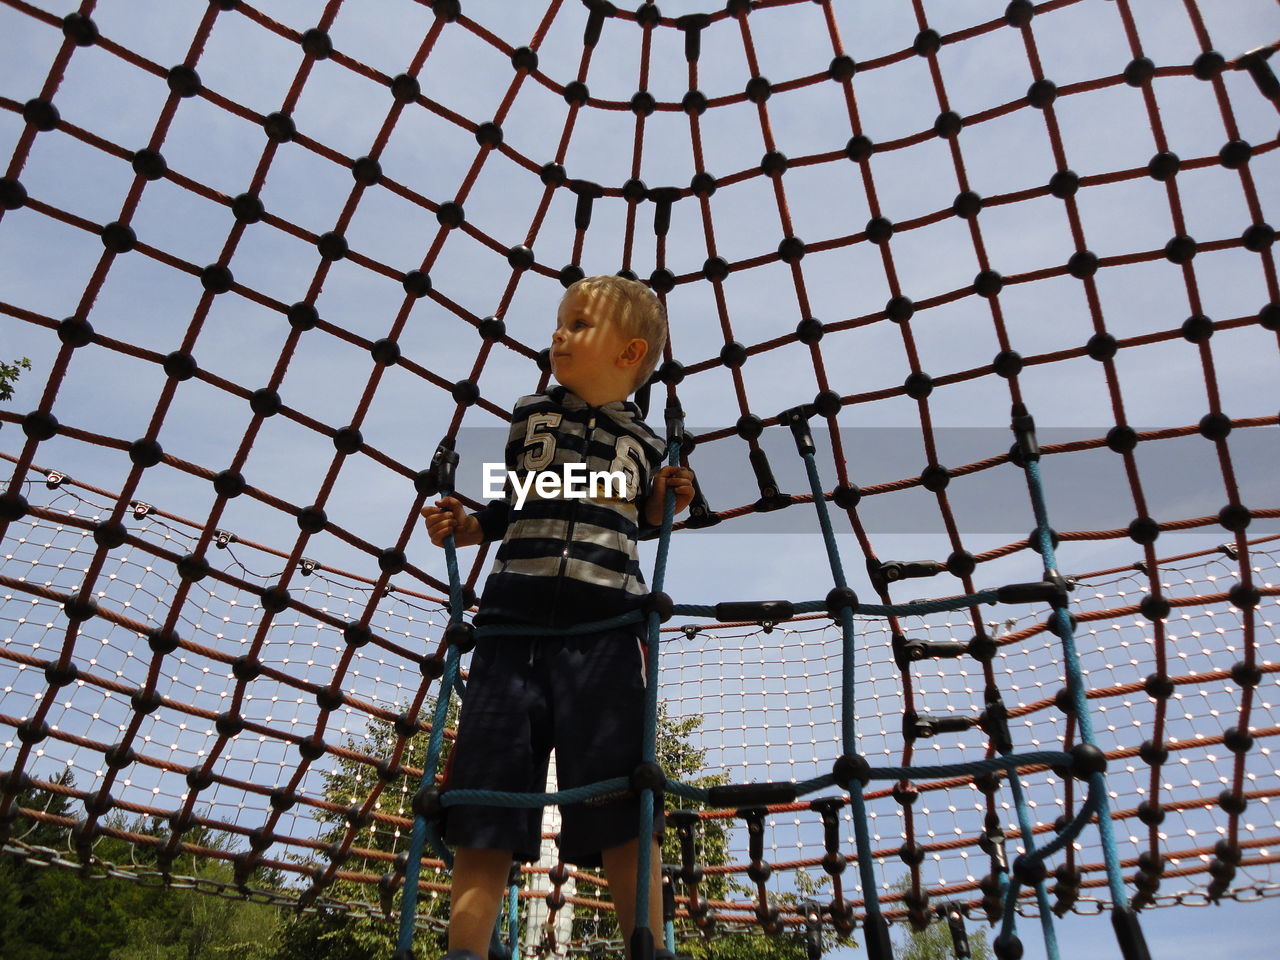 Boy climbing rope against sky at park